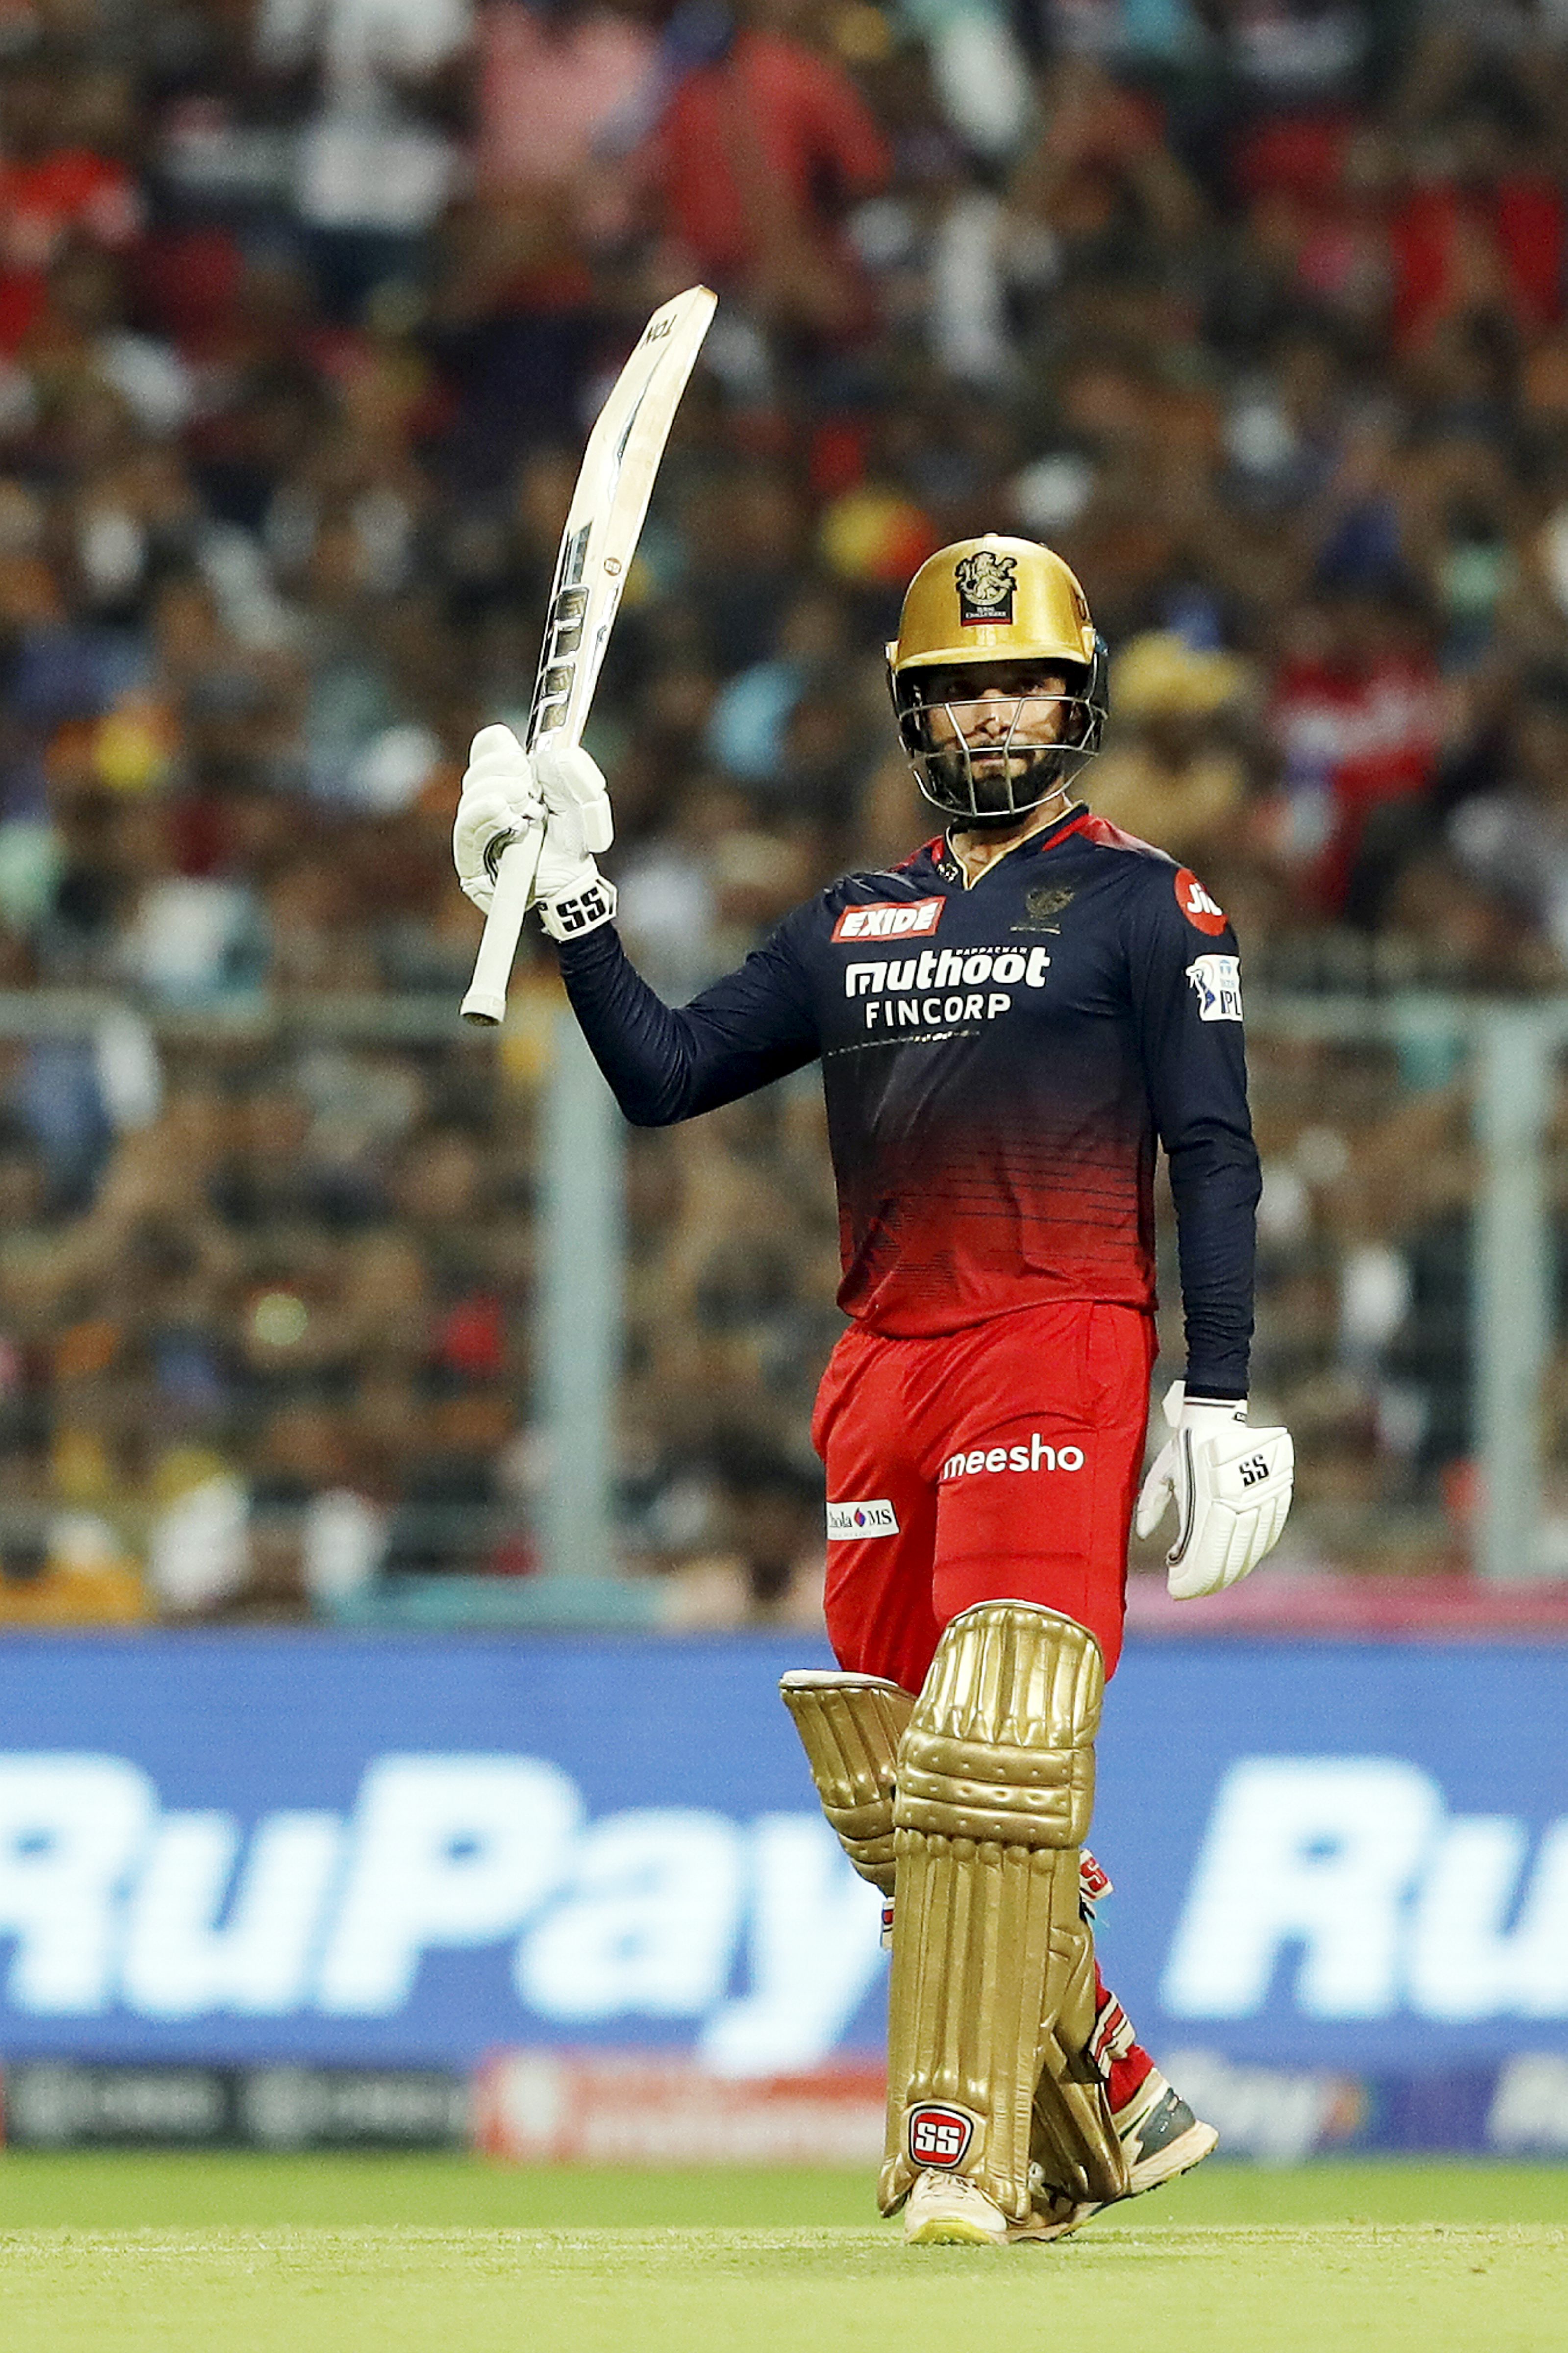 Royal Challengers Bangalore up against Rajasthan Royals in Qualifier 2 for a place in final